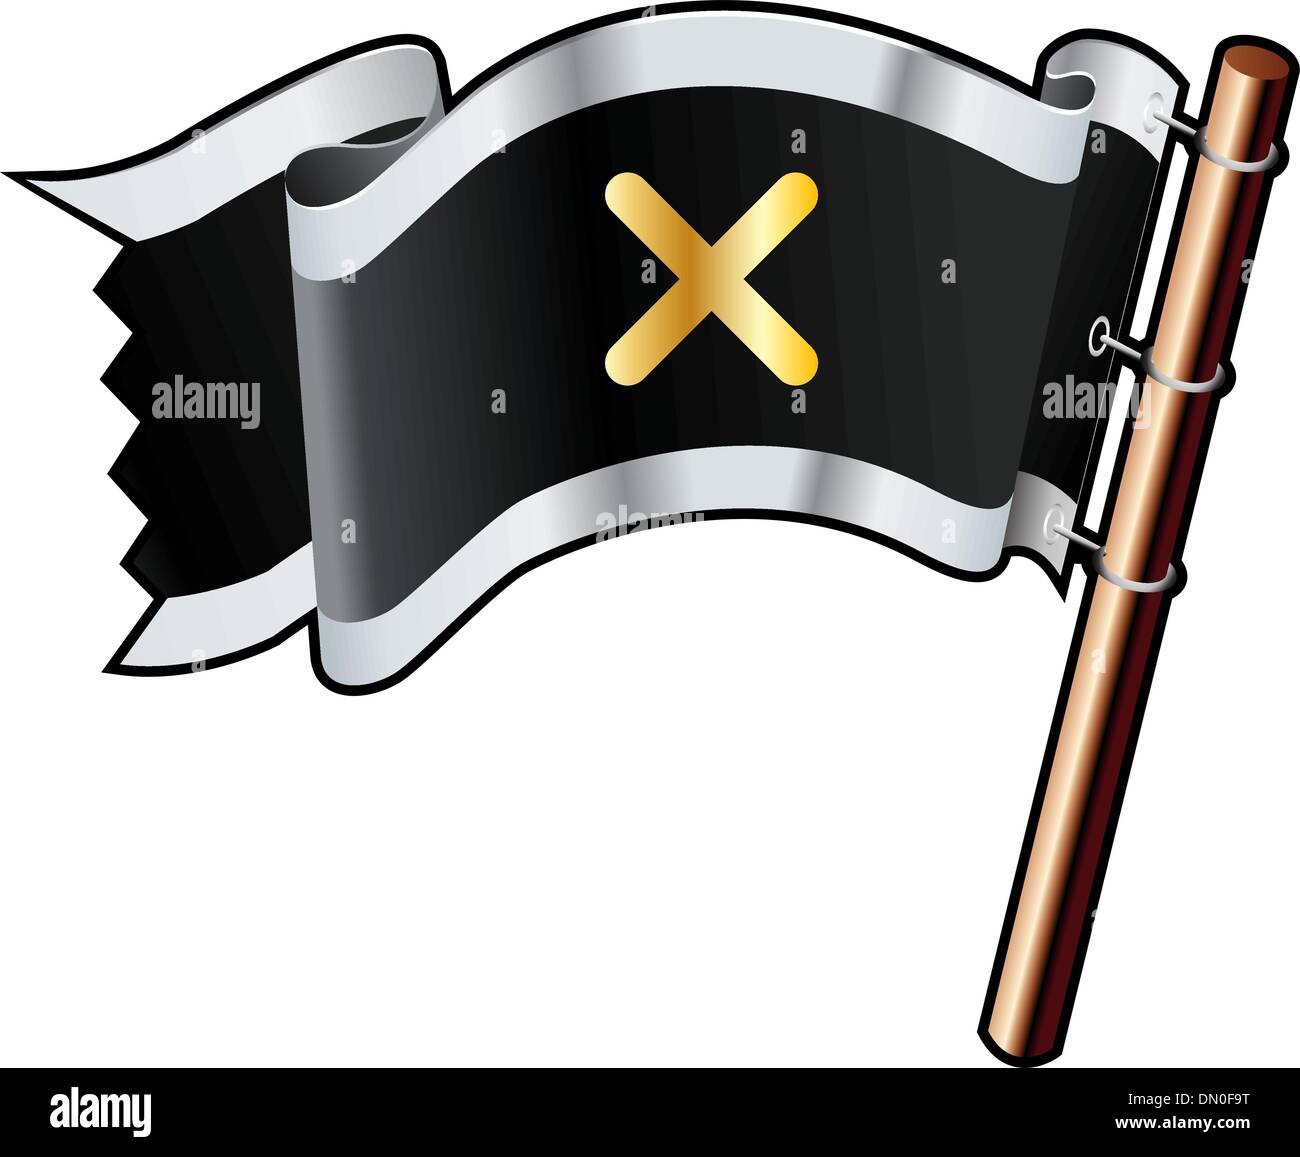 X or close pirate flag Stock Vector